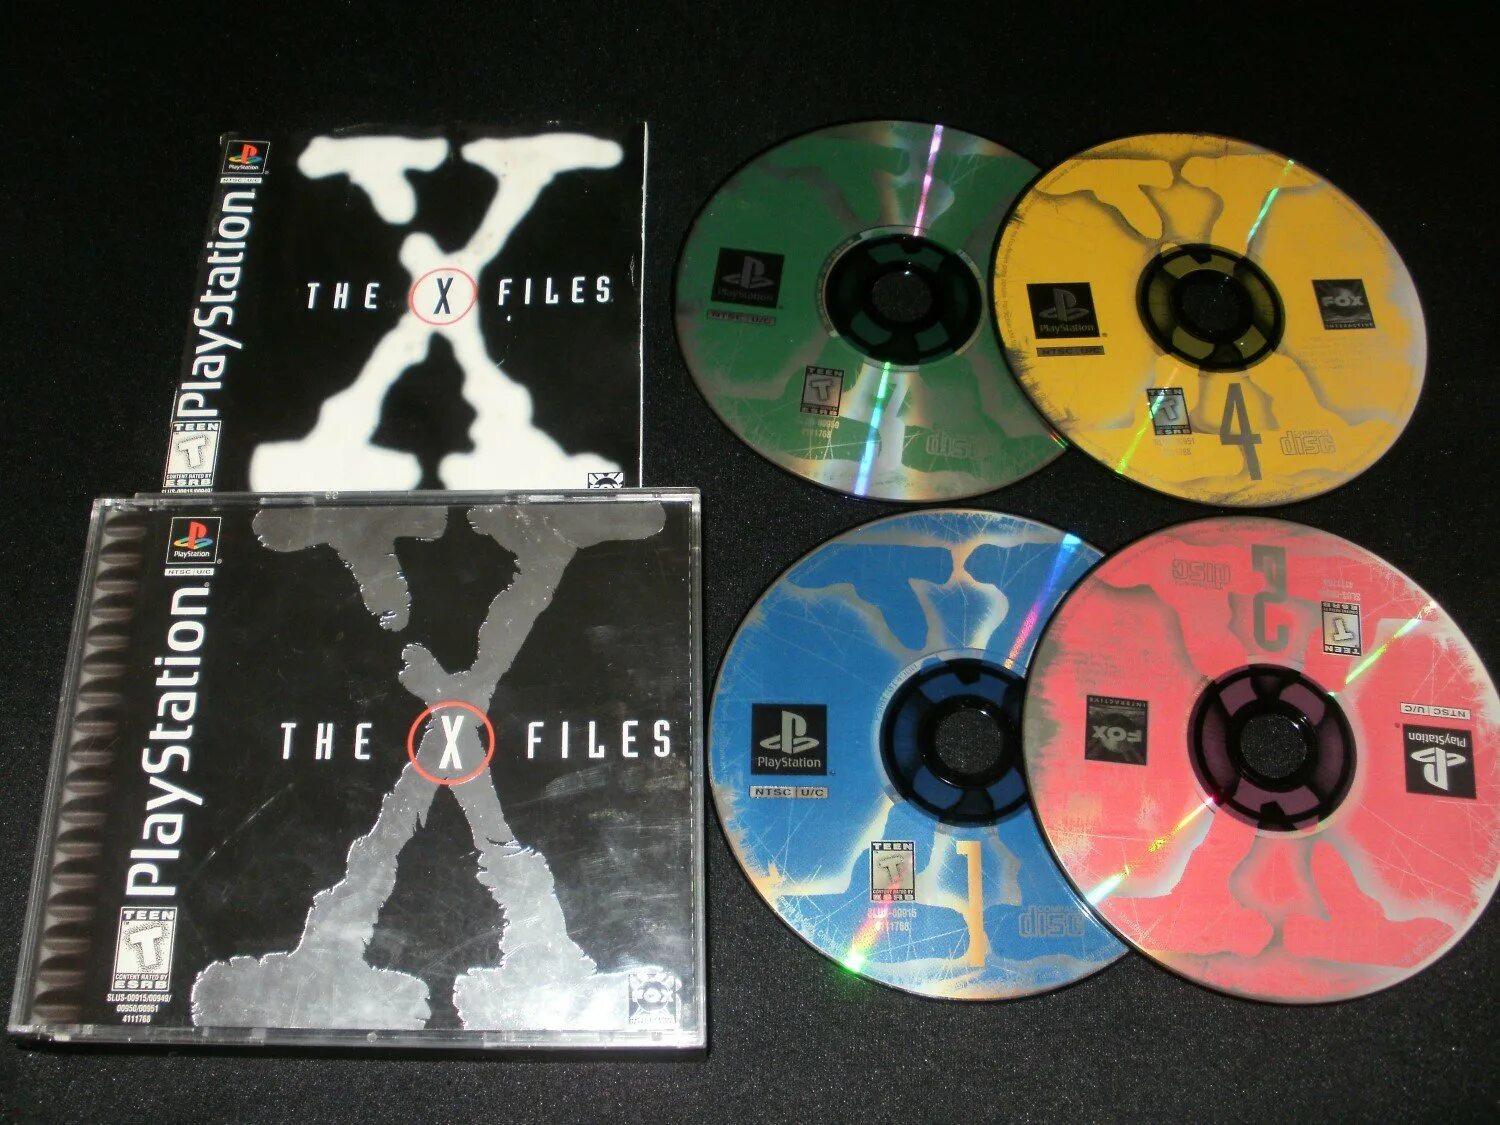 Playstation 1 диски. X files игра ps1. Секретные материалы ps1. X files ps2 обложка. The x-files game CD.